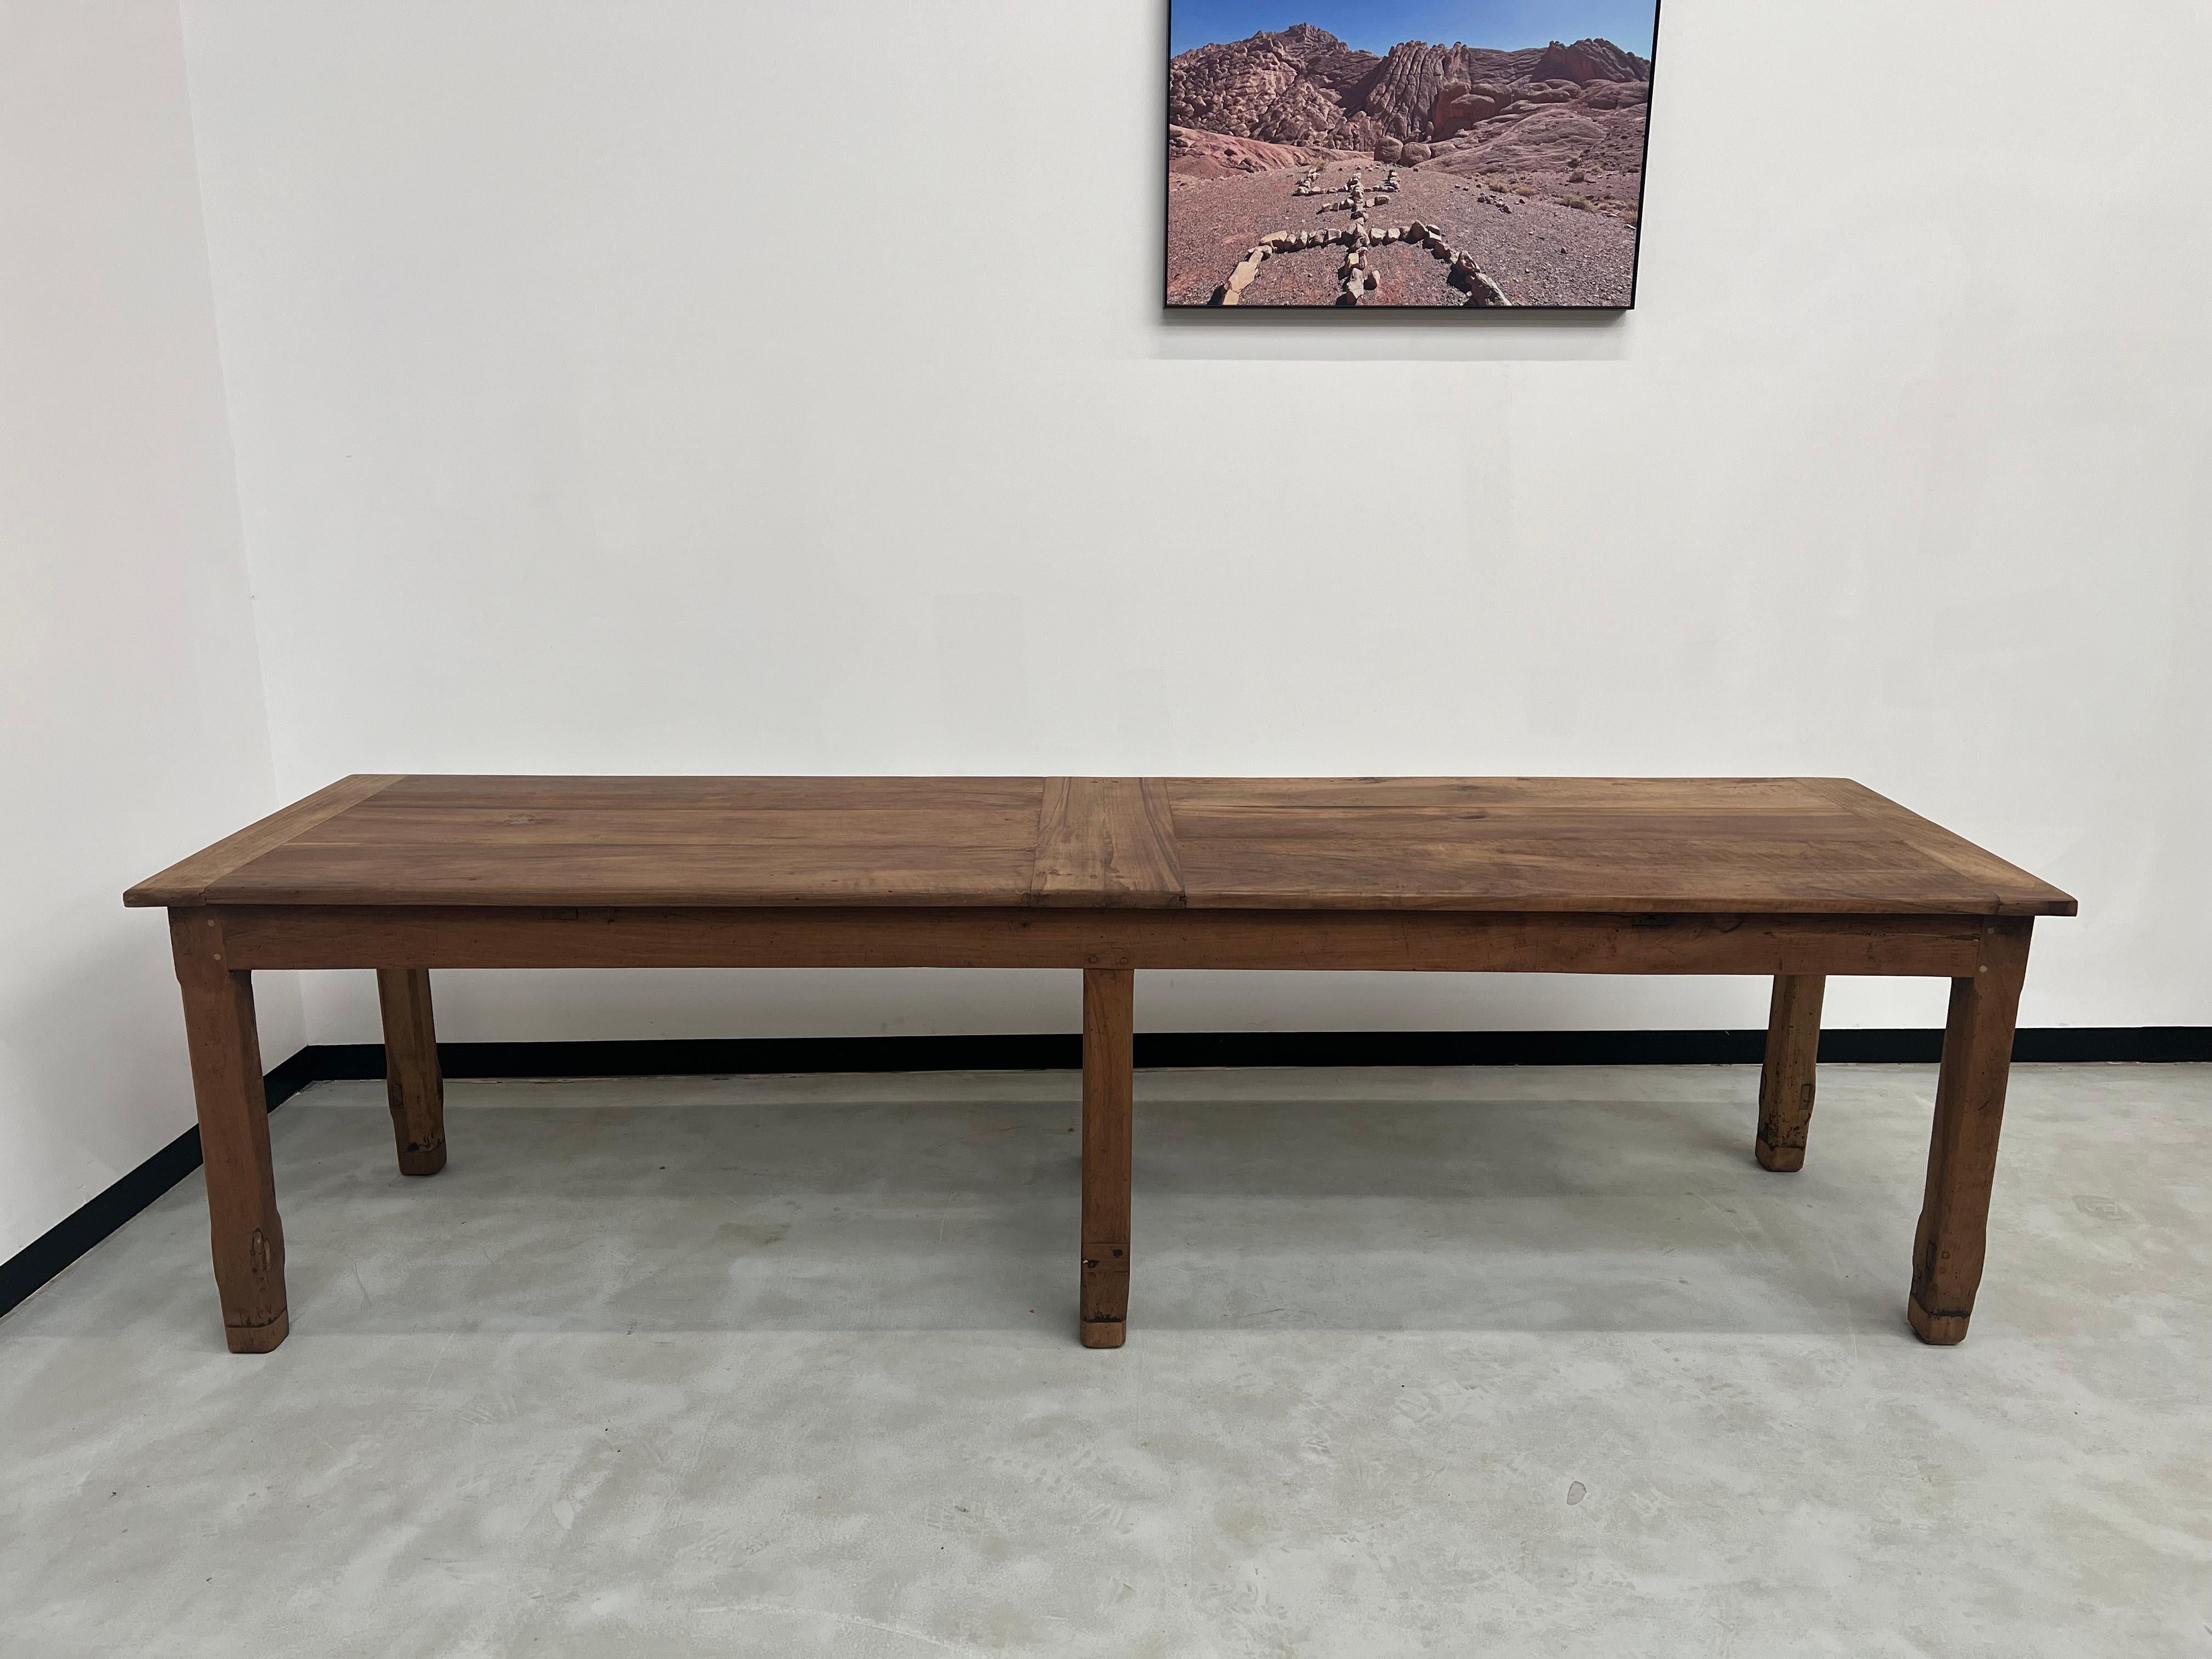 This majestic 6-legged farm table is presented here to give character to your interior and allow you to receive many guests at the table. Its generous dimensions and its careful period cabinetwork attest to its rarity. Our artisan cabinetmaker has